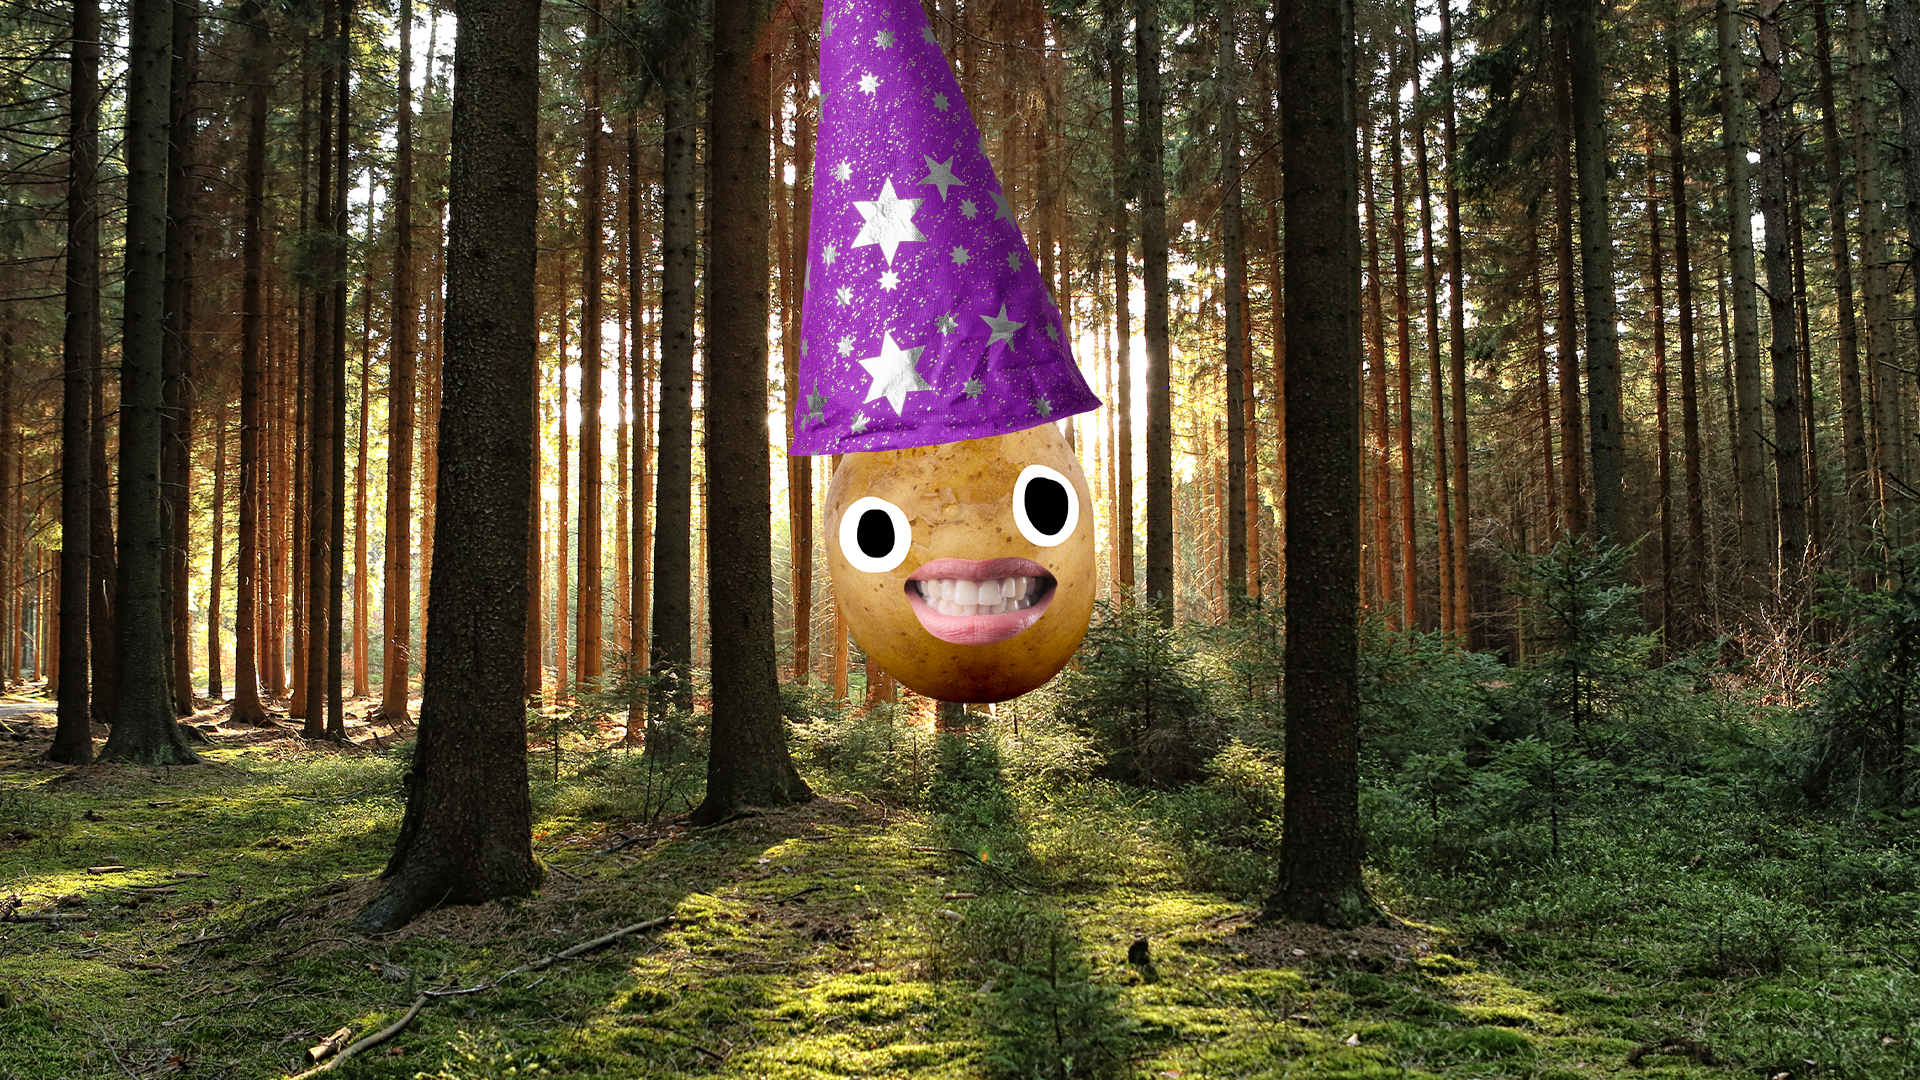 A Beano potato wizard in a forest